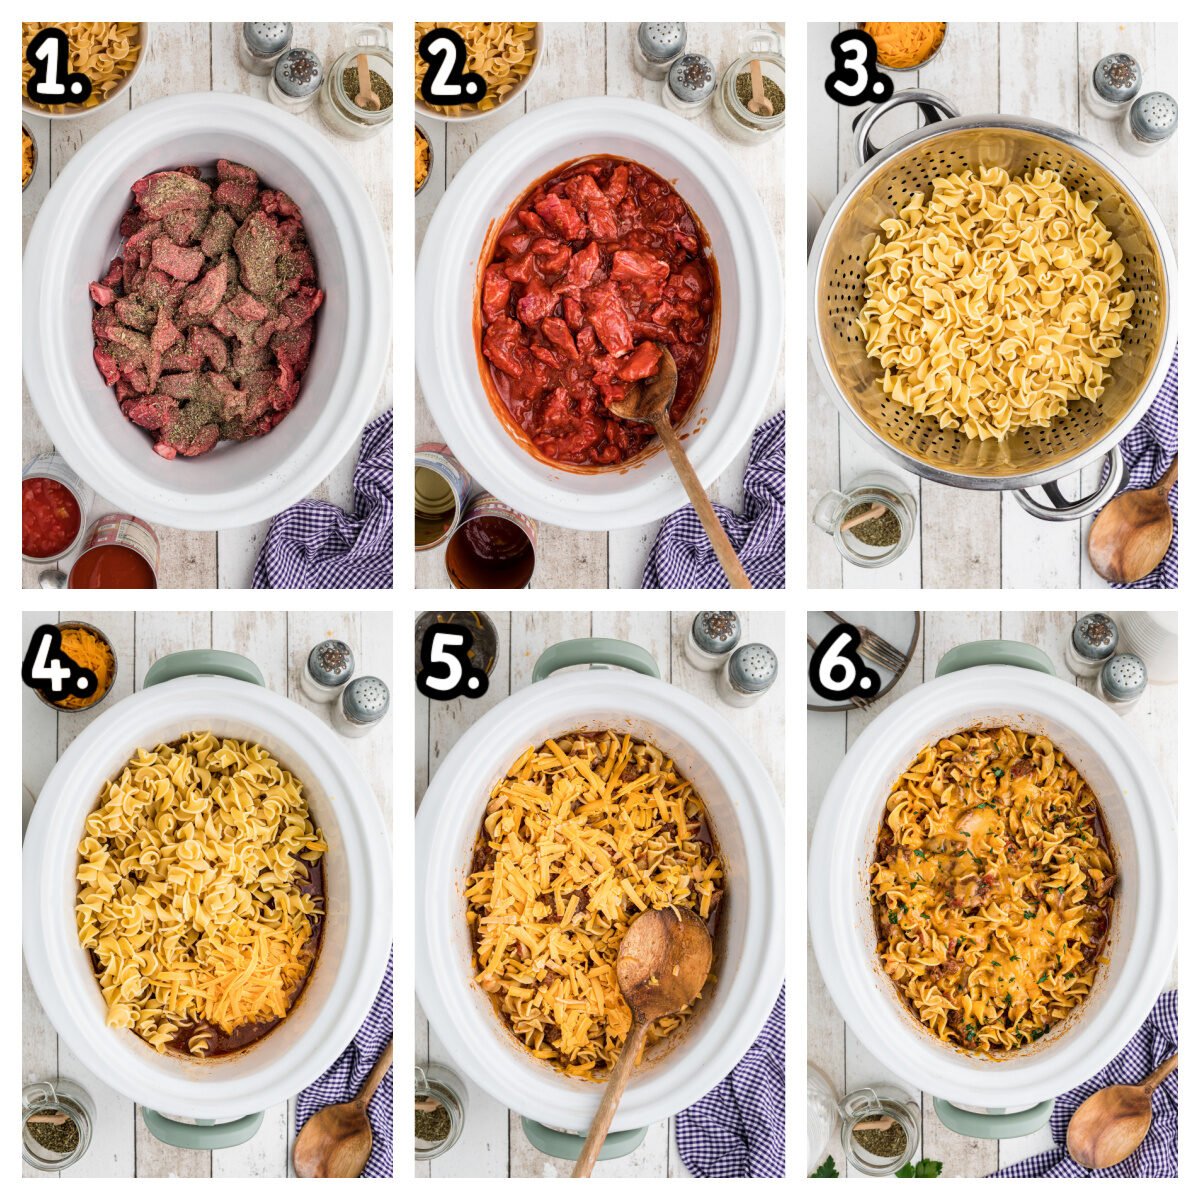 6 images showing how to make beef noodle casserole in a crockpot.